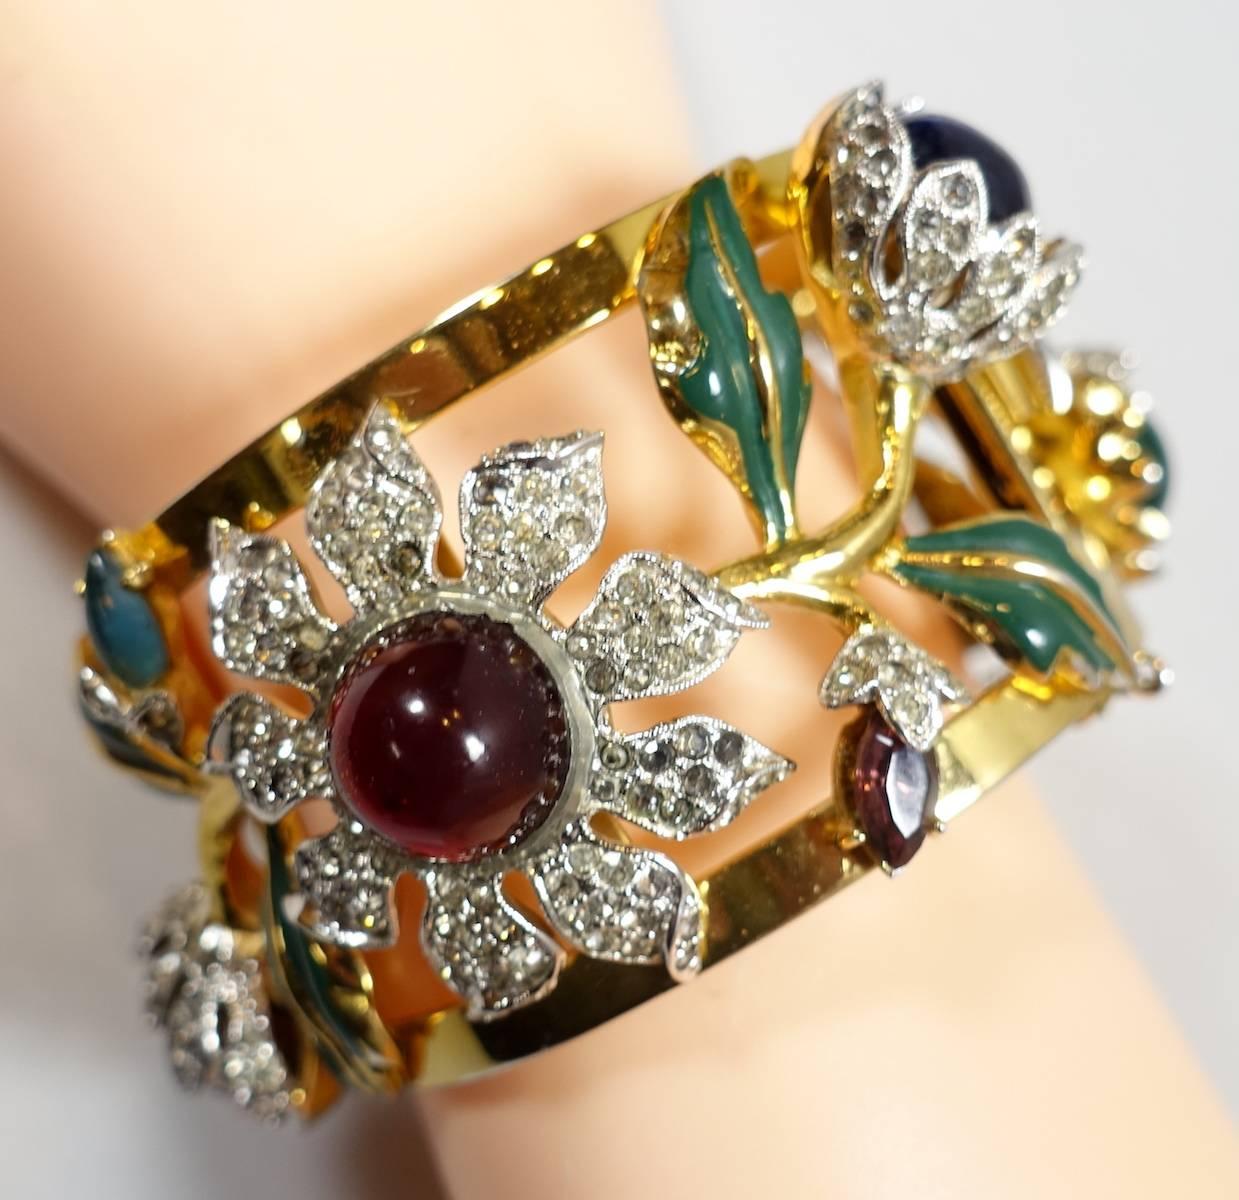 This is the famous Carmen Miranda “Camelia” Coro book piece bracelet featured in the 1948 movie “A Date with Judy”. This dazzling hinged bracelet features an open work floral design with a pattern of Camellia blossoms, multi-colored poured glass